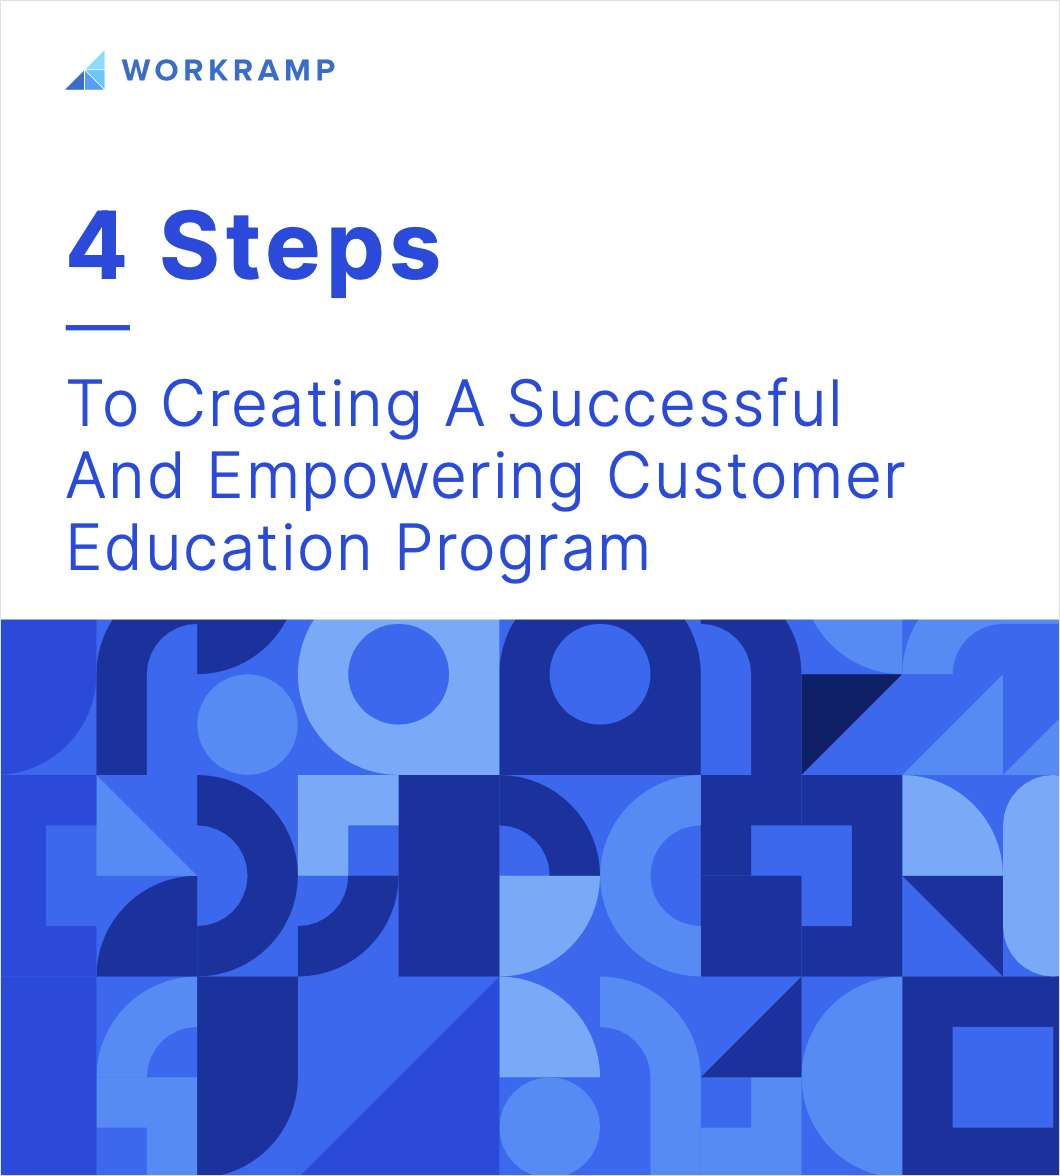 4 Steps to Creating a Successful and Empowering Customer Education Program